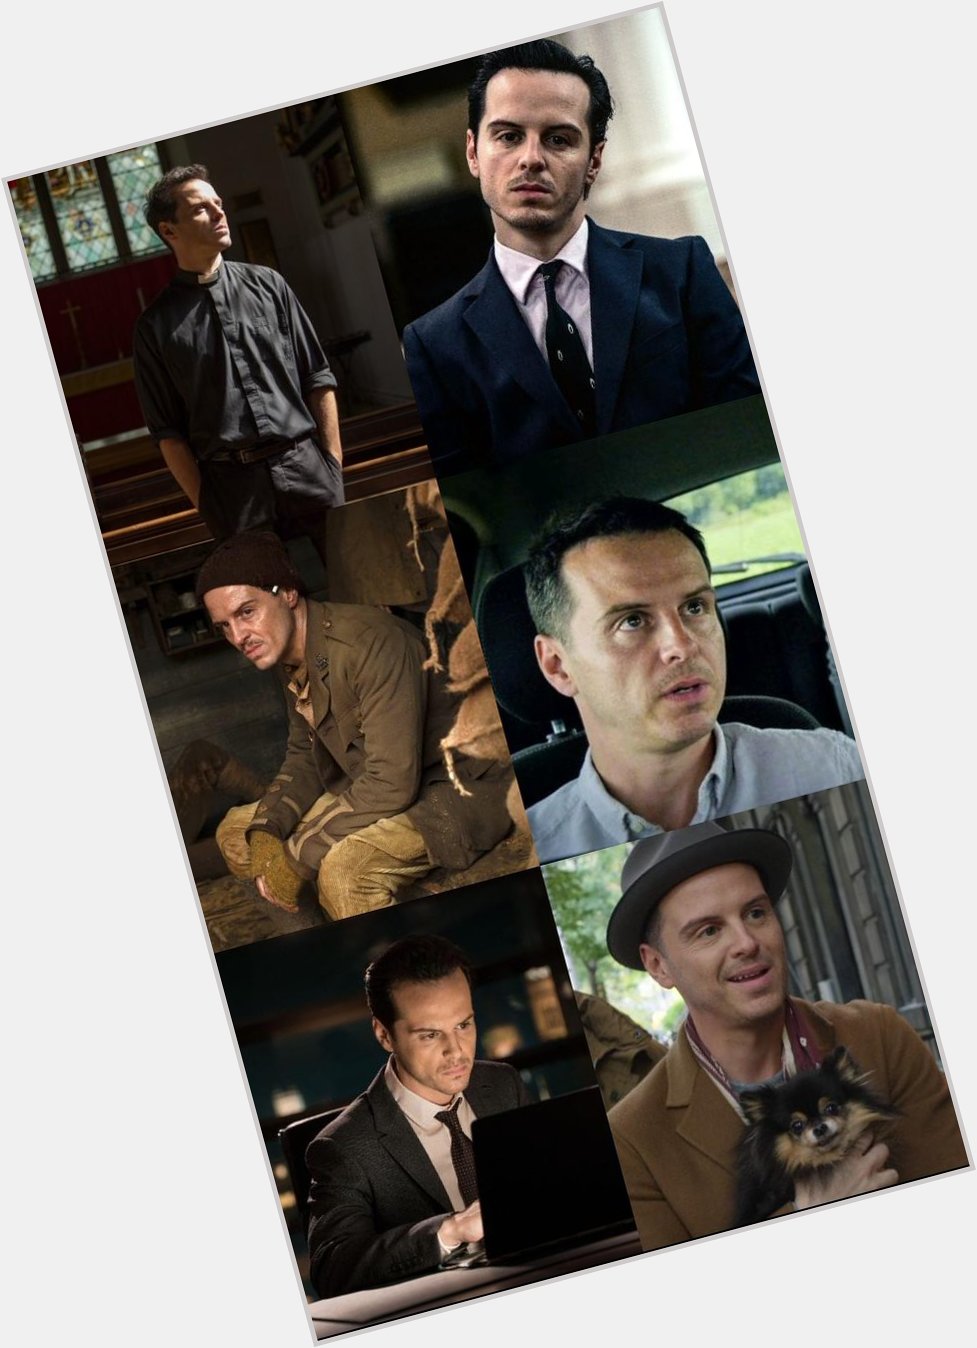 Happy Birthday, Andrew Scott! Which role is your favorite? mvs 